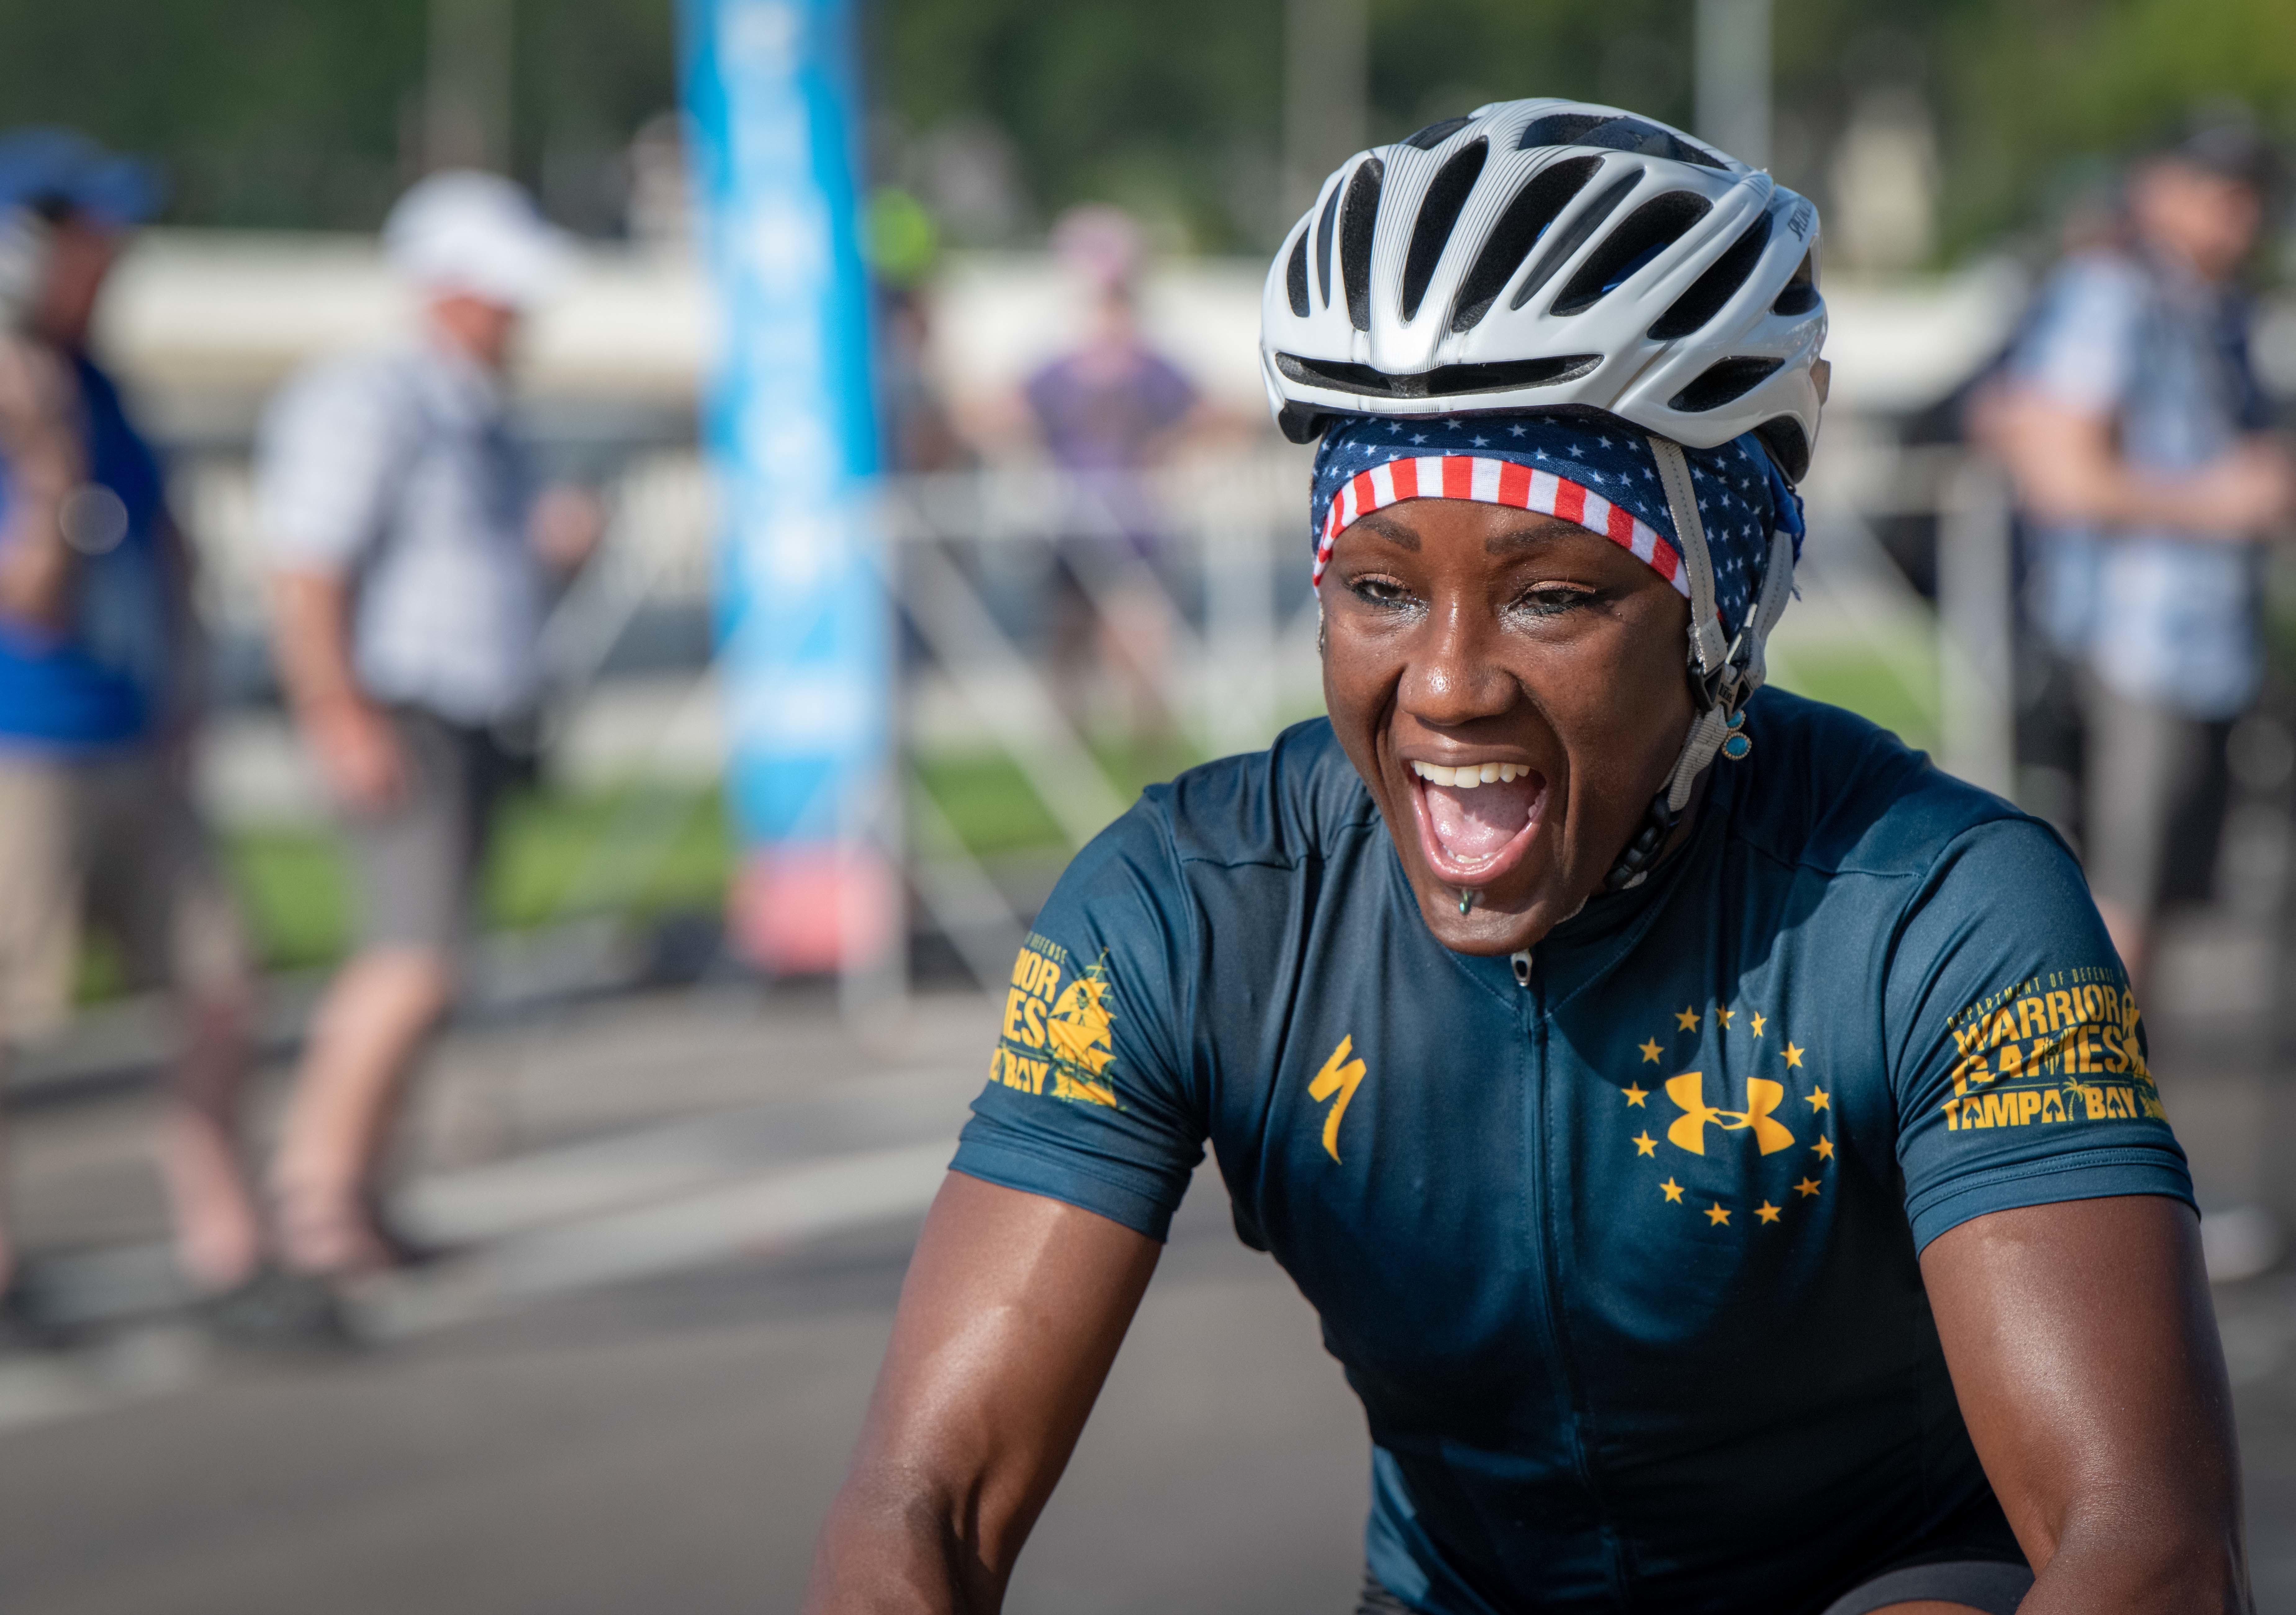 An African American woman smiles while biking during the cycling time trials for Team Navy during the 2019 DoD Warrior Games in Tampa, Florida.